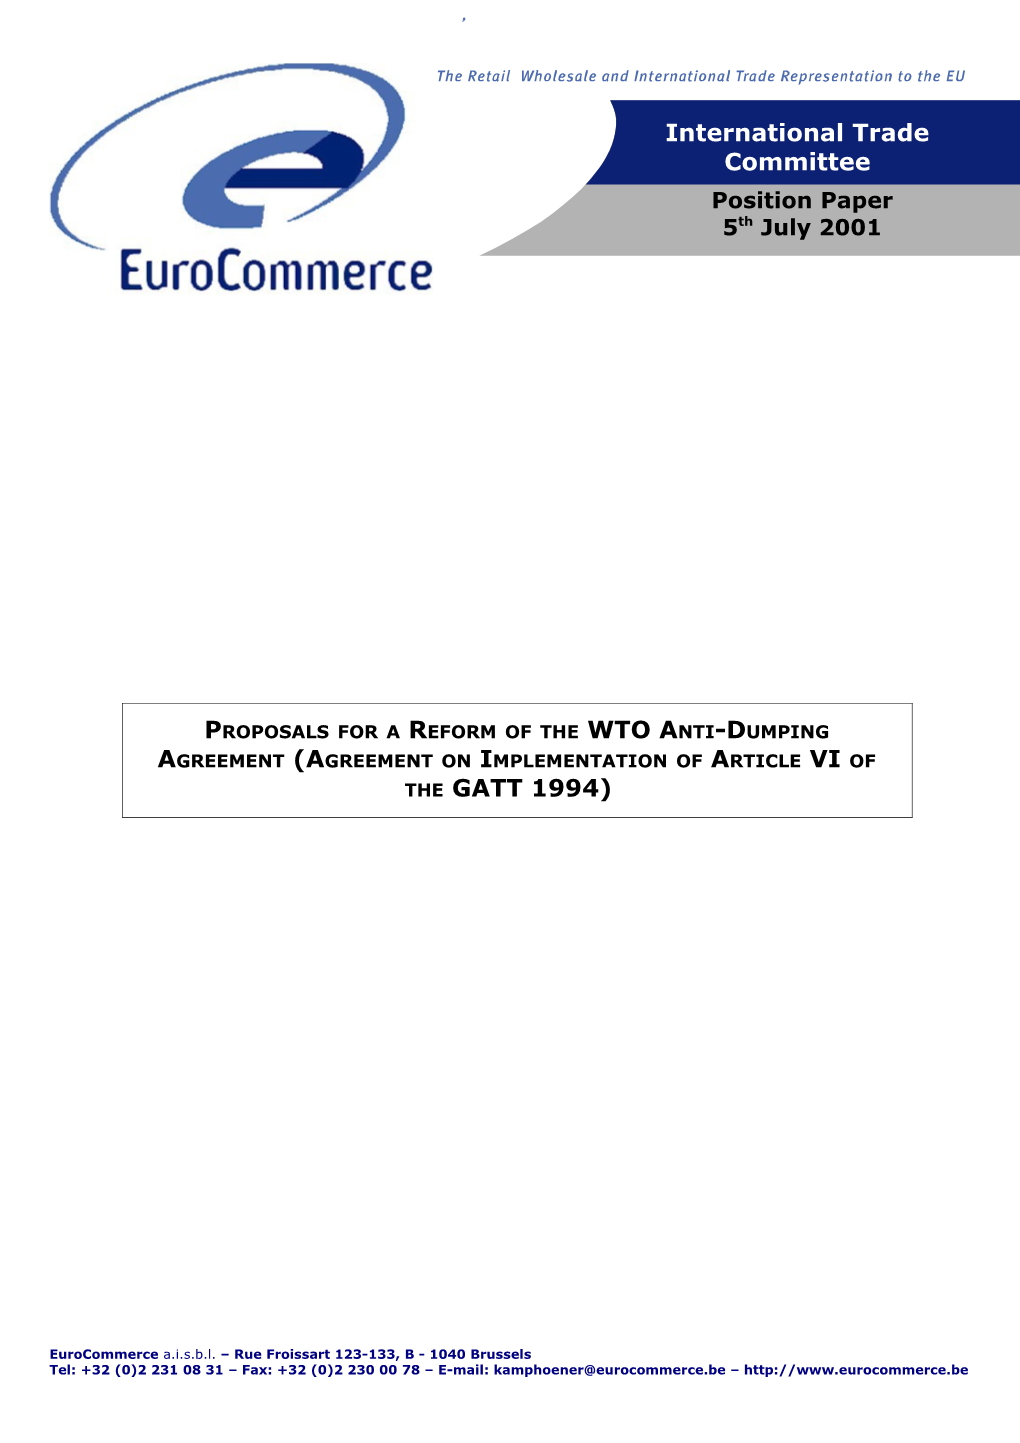 Proposals for a Reform of the WTO Anti-Dumping Agreement (Agreement on Implementation